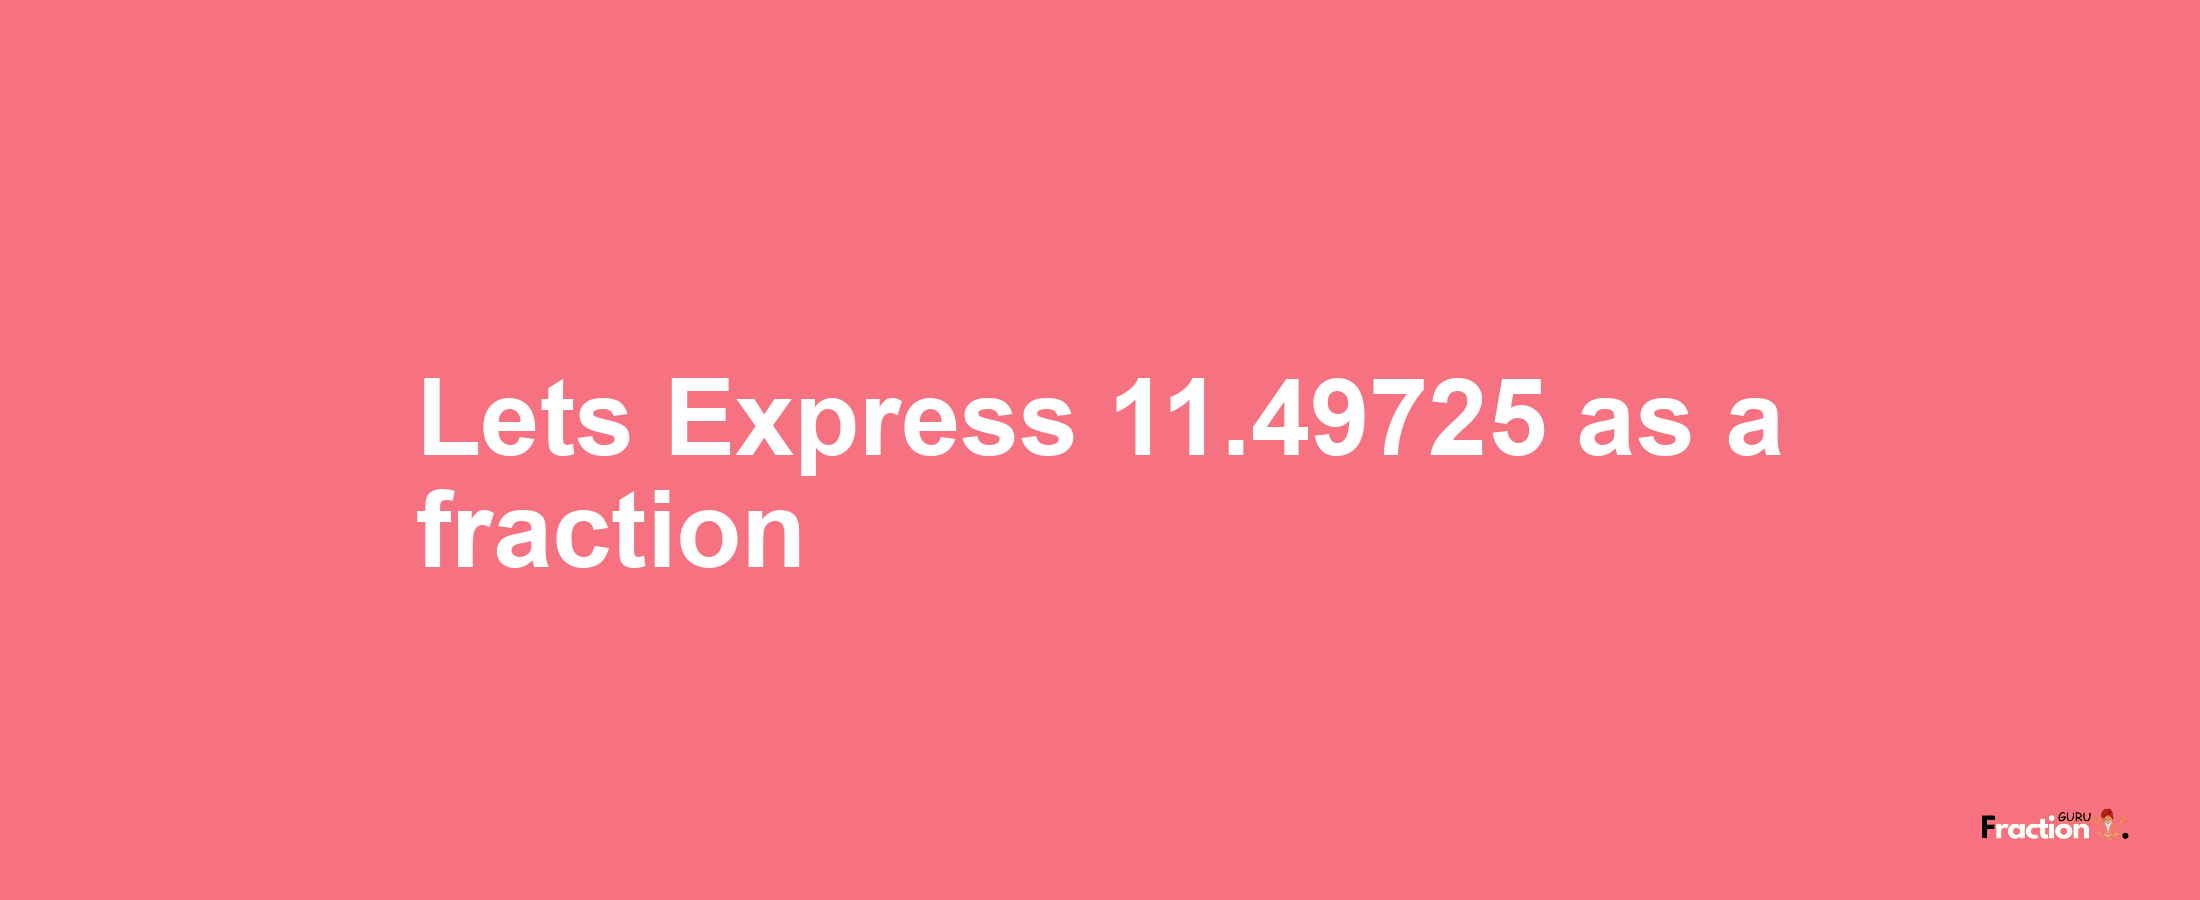 Lets Express 11.49725 as afraction